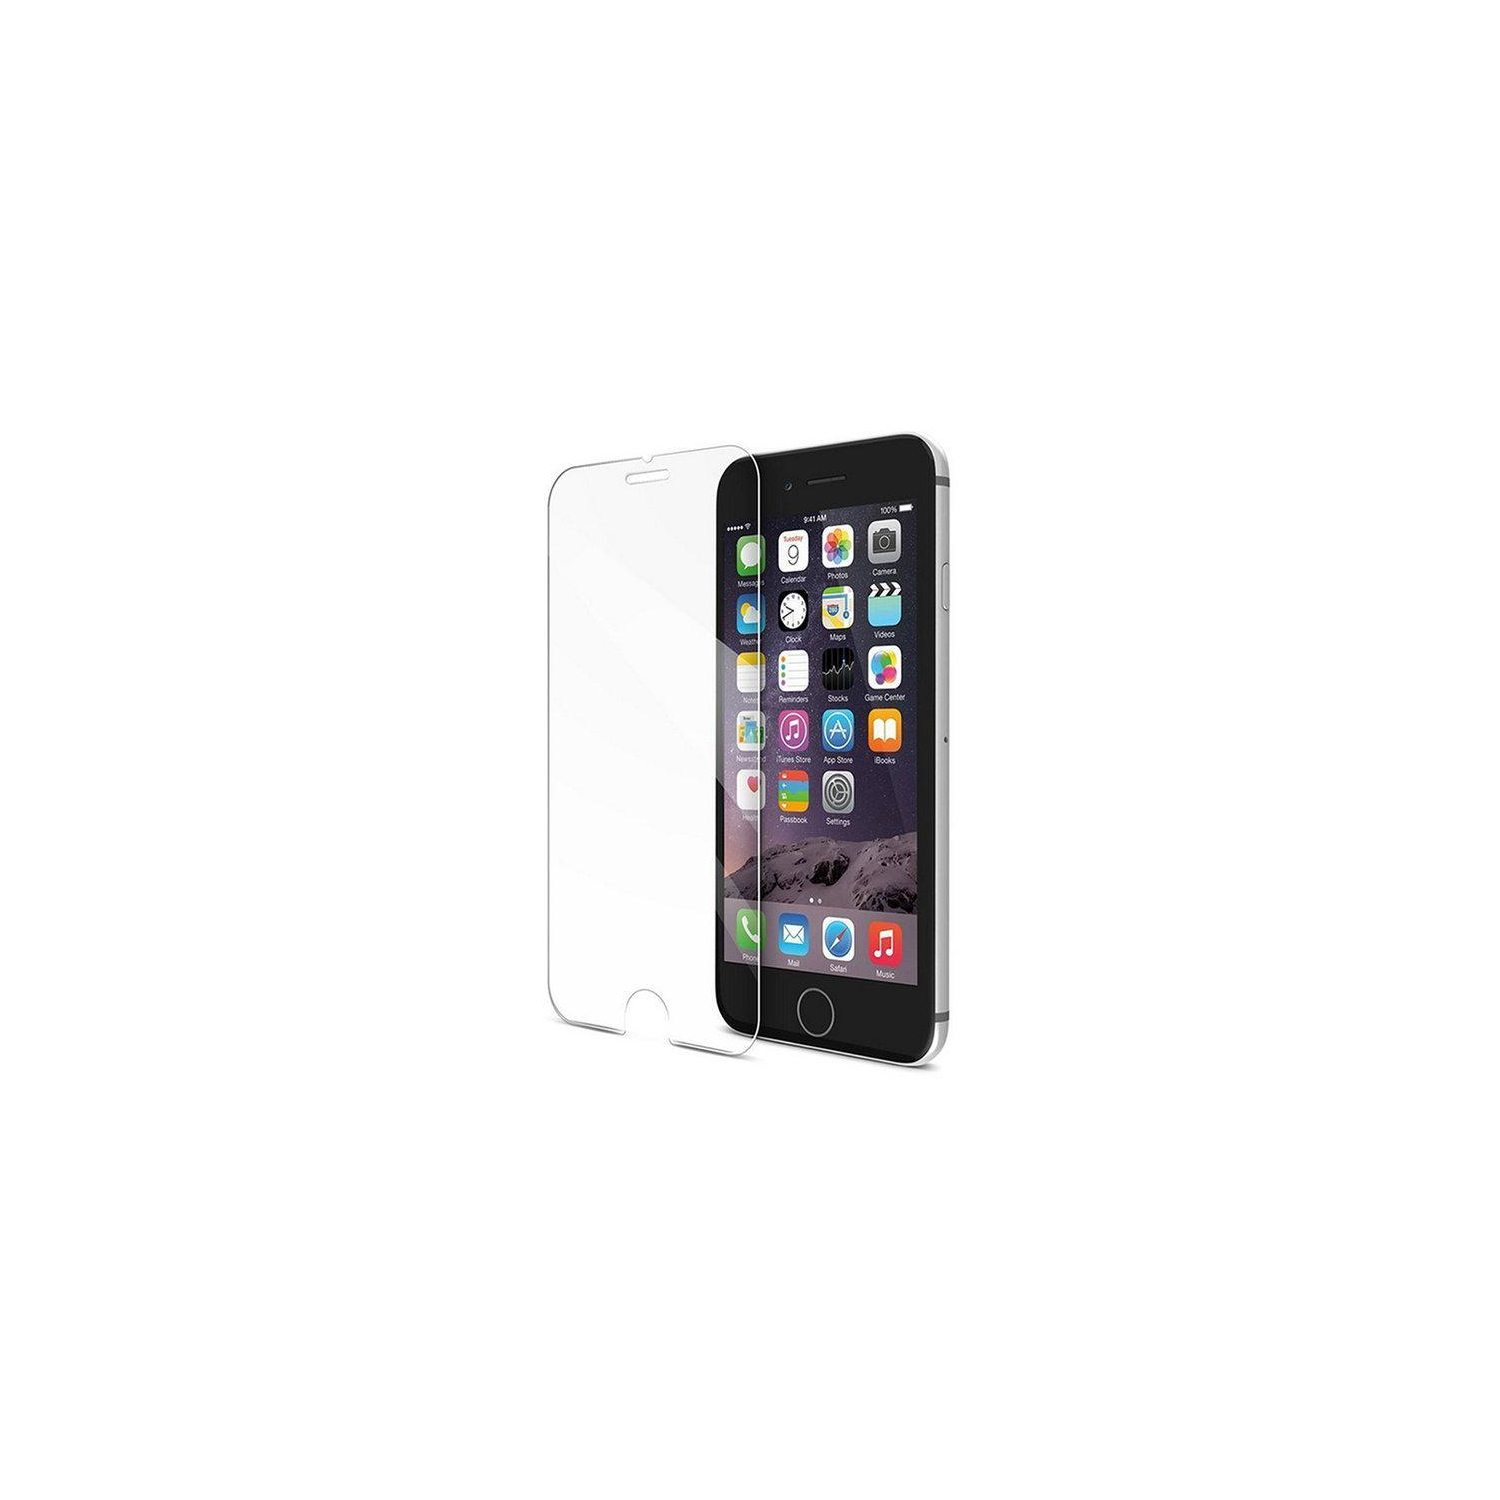 PANDACO Tempered Glass 0.26mm/2.5D Ultra Thin Screen Protector for iPhone 6 or iPhone 6S